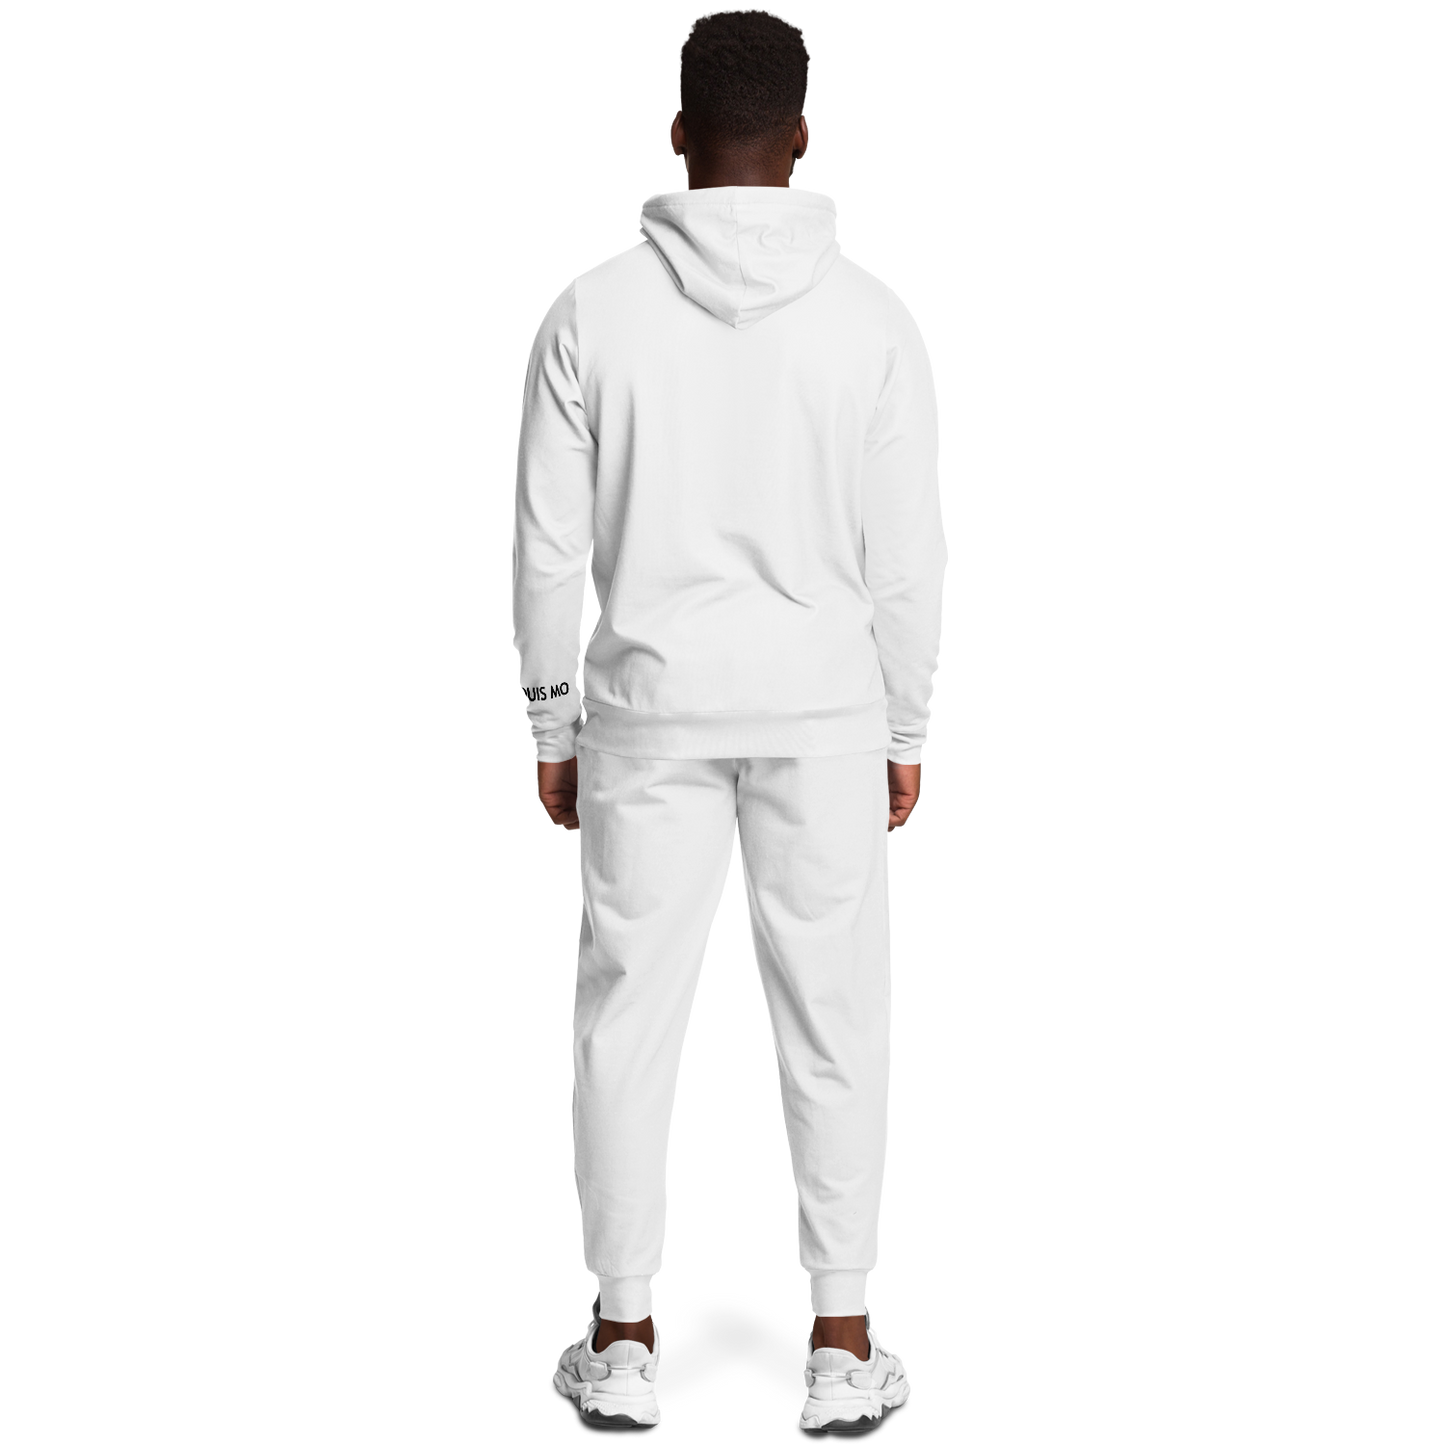 Saint Louis White Hoodie and Joggers TWO